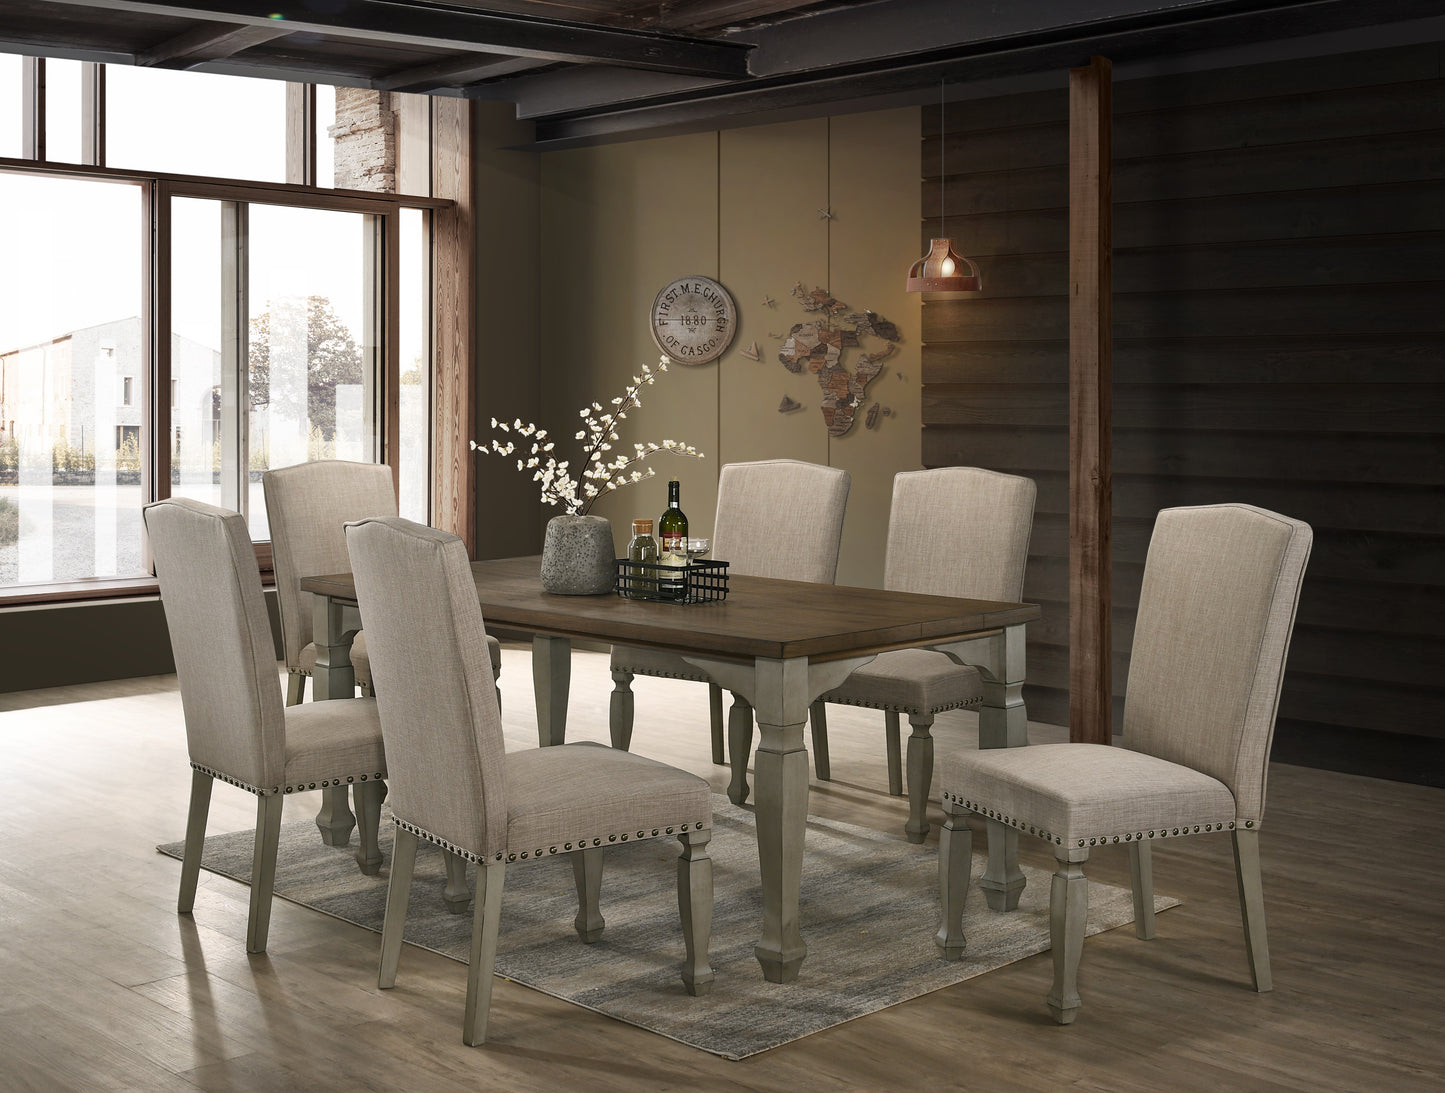 Breda Antique Gray and Dark Oak Finished Wood Dining Set, Table with Six Chairs